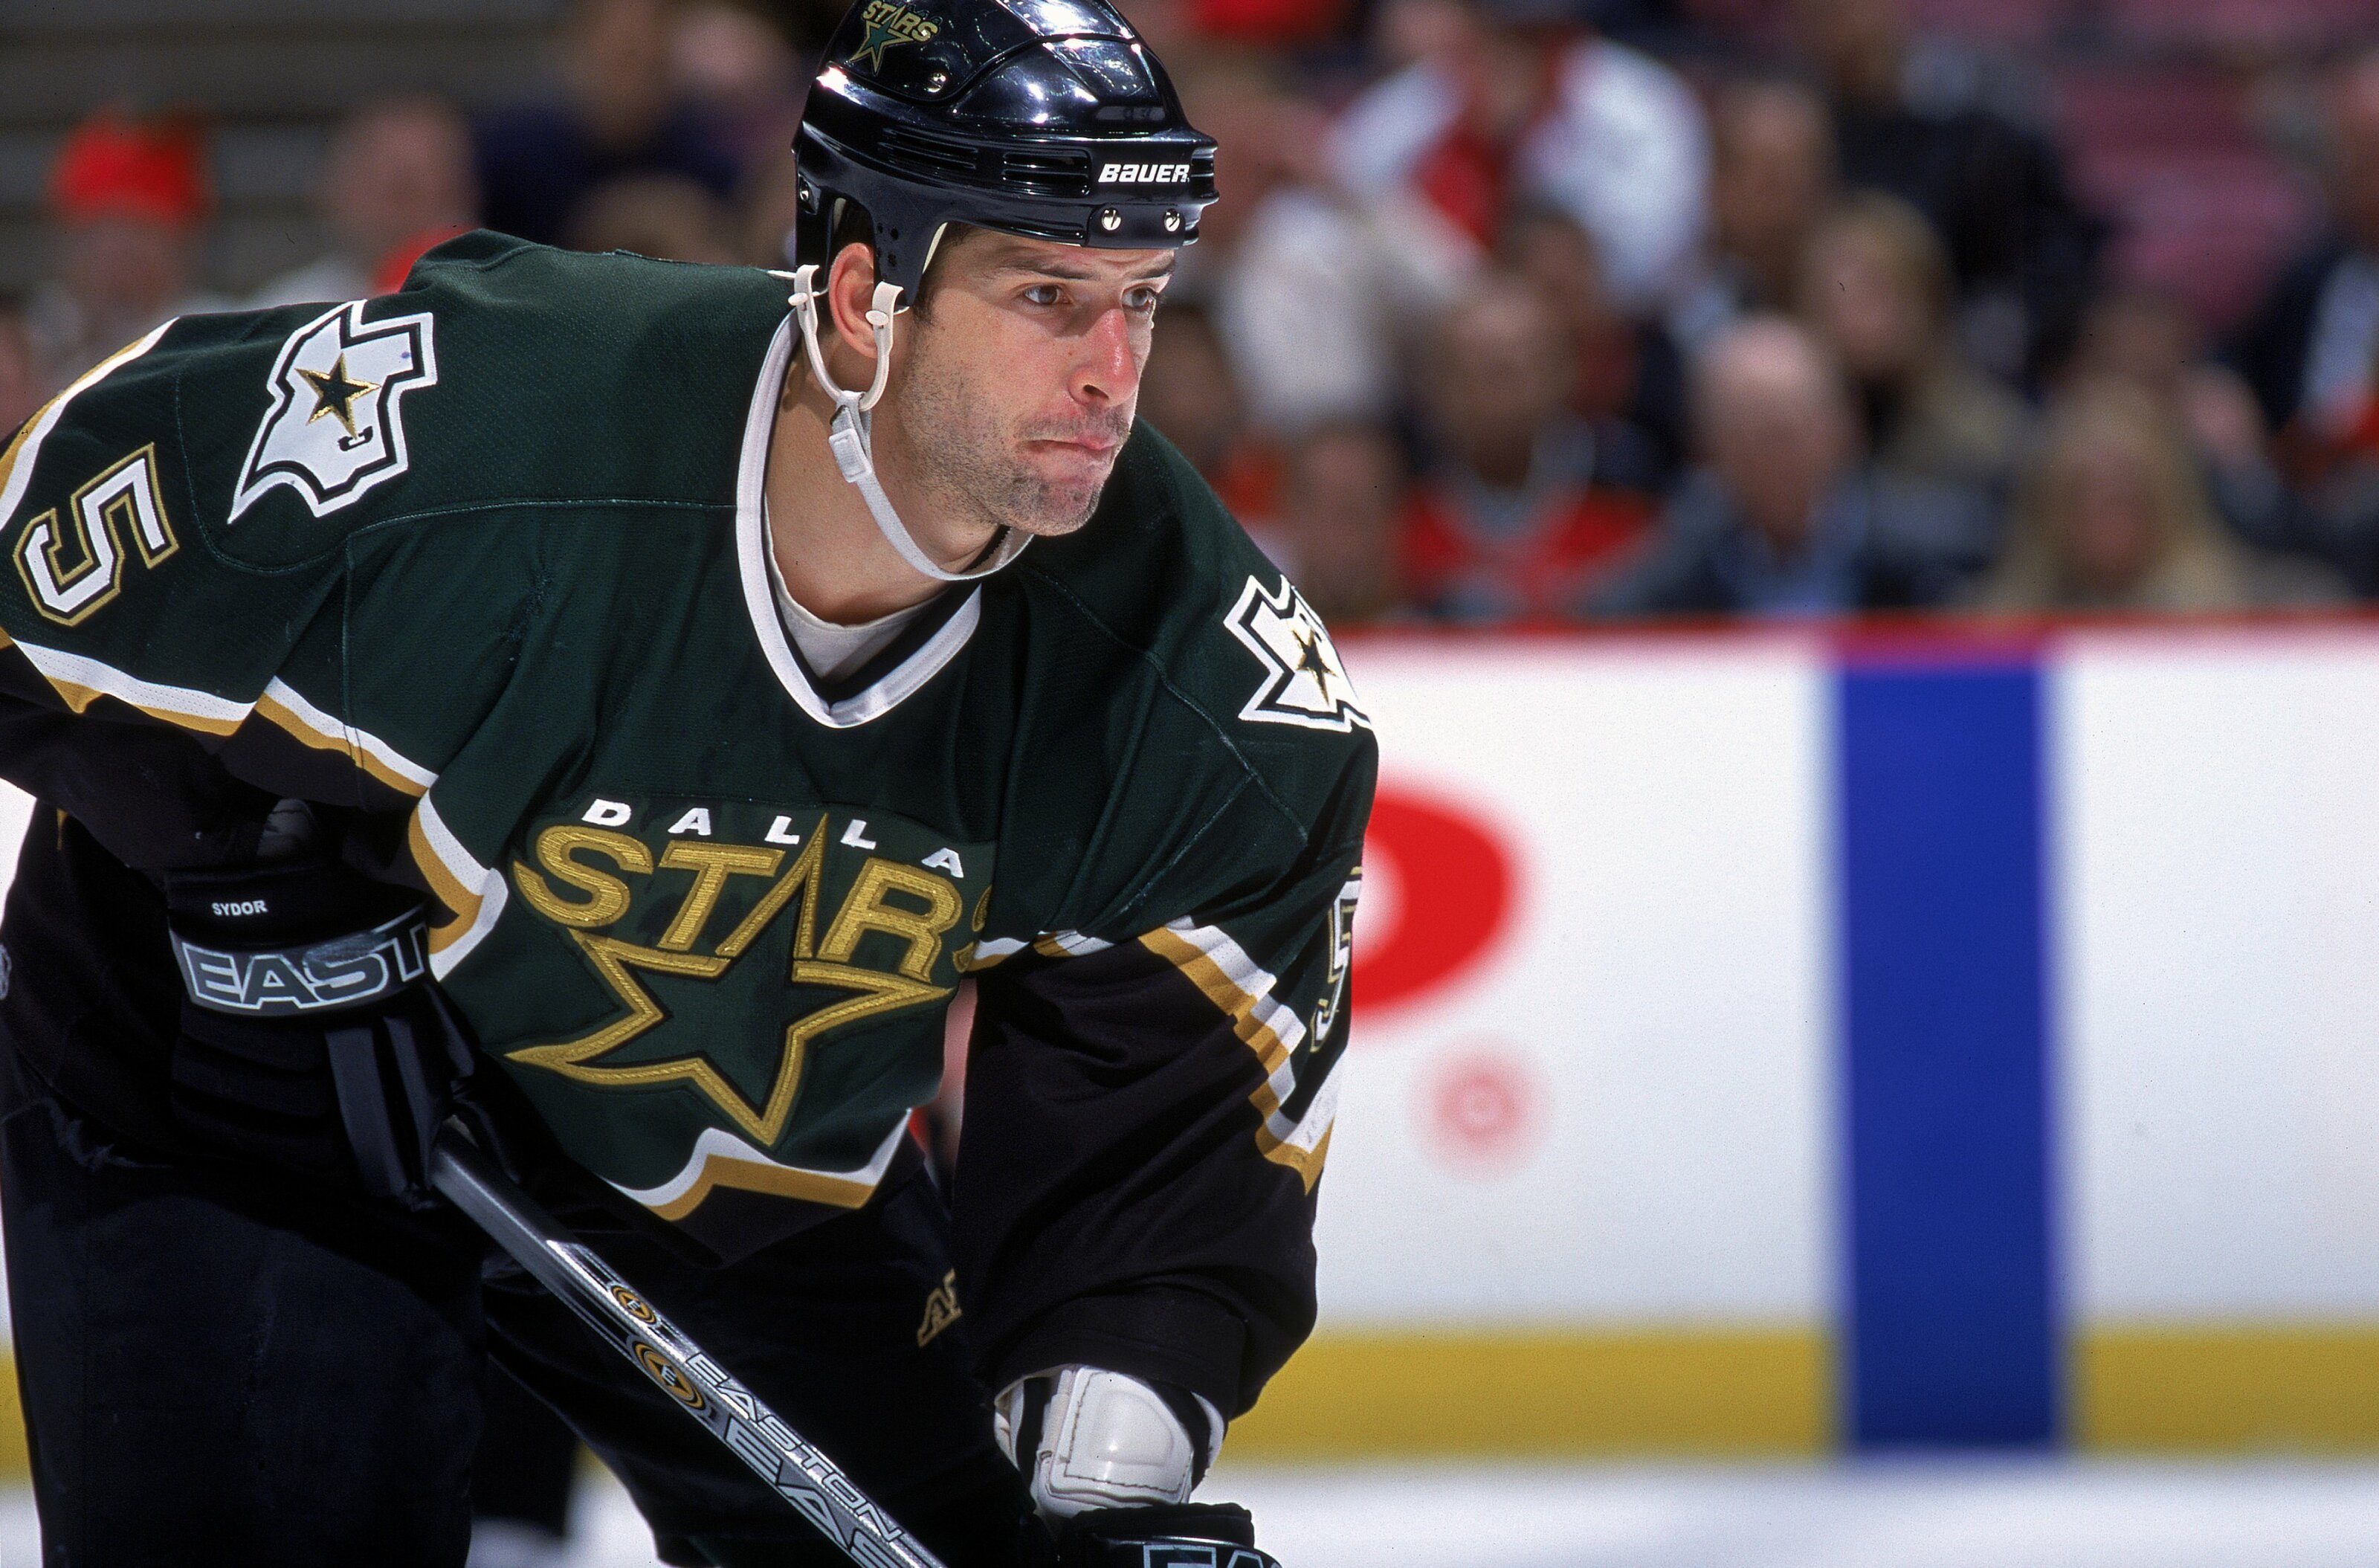 Q&A: Sergei Zubov on number retirement, Hall of Fame thoughts